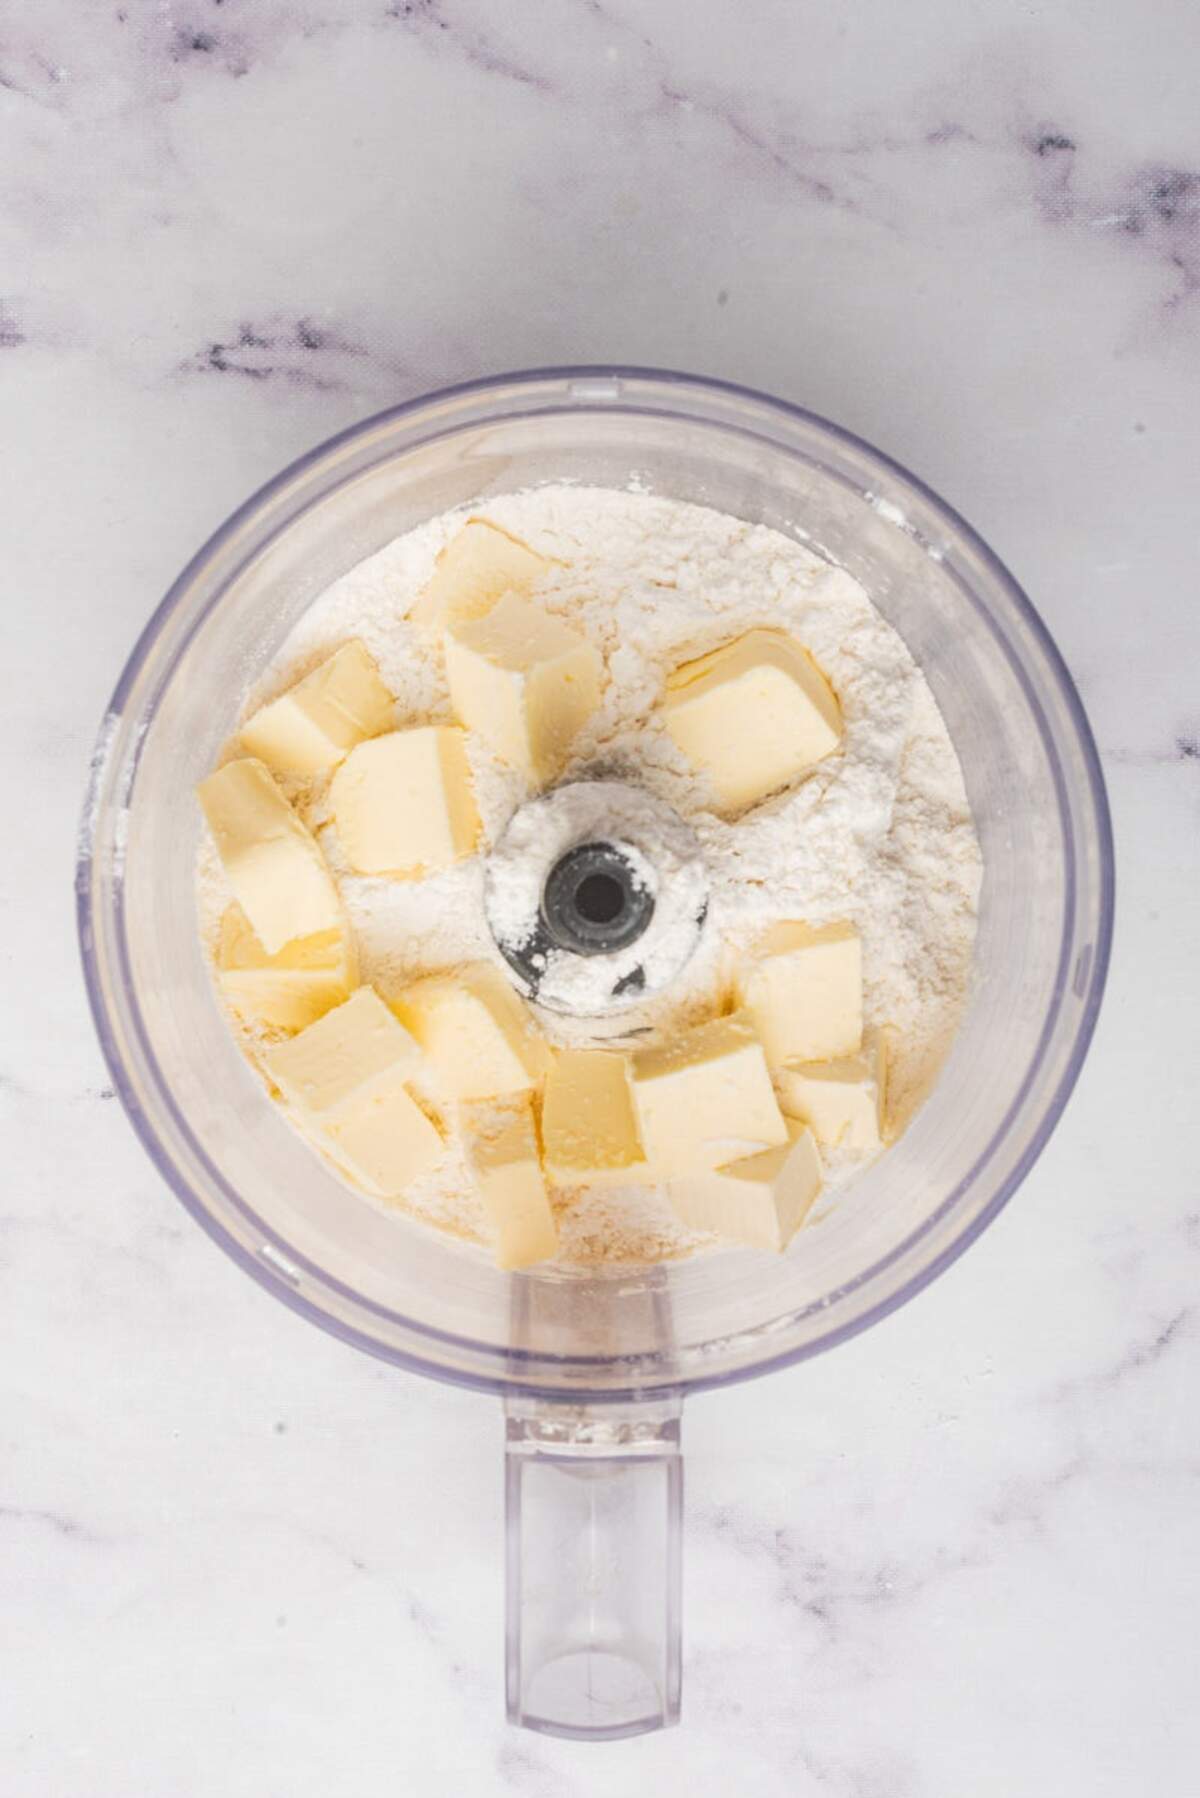 Cubes of butter added to the dry ingredients in a food processor for making pie crust.